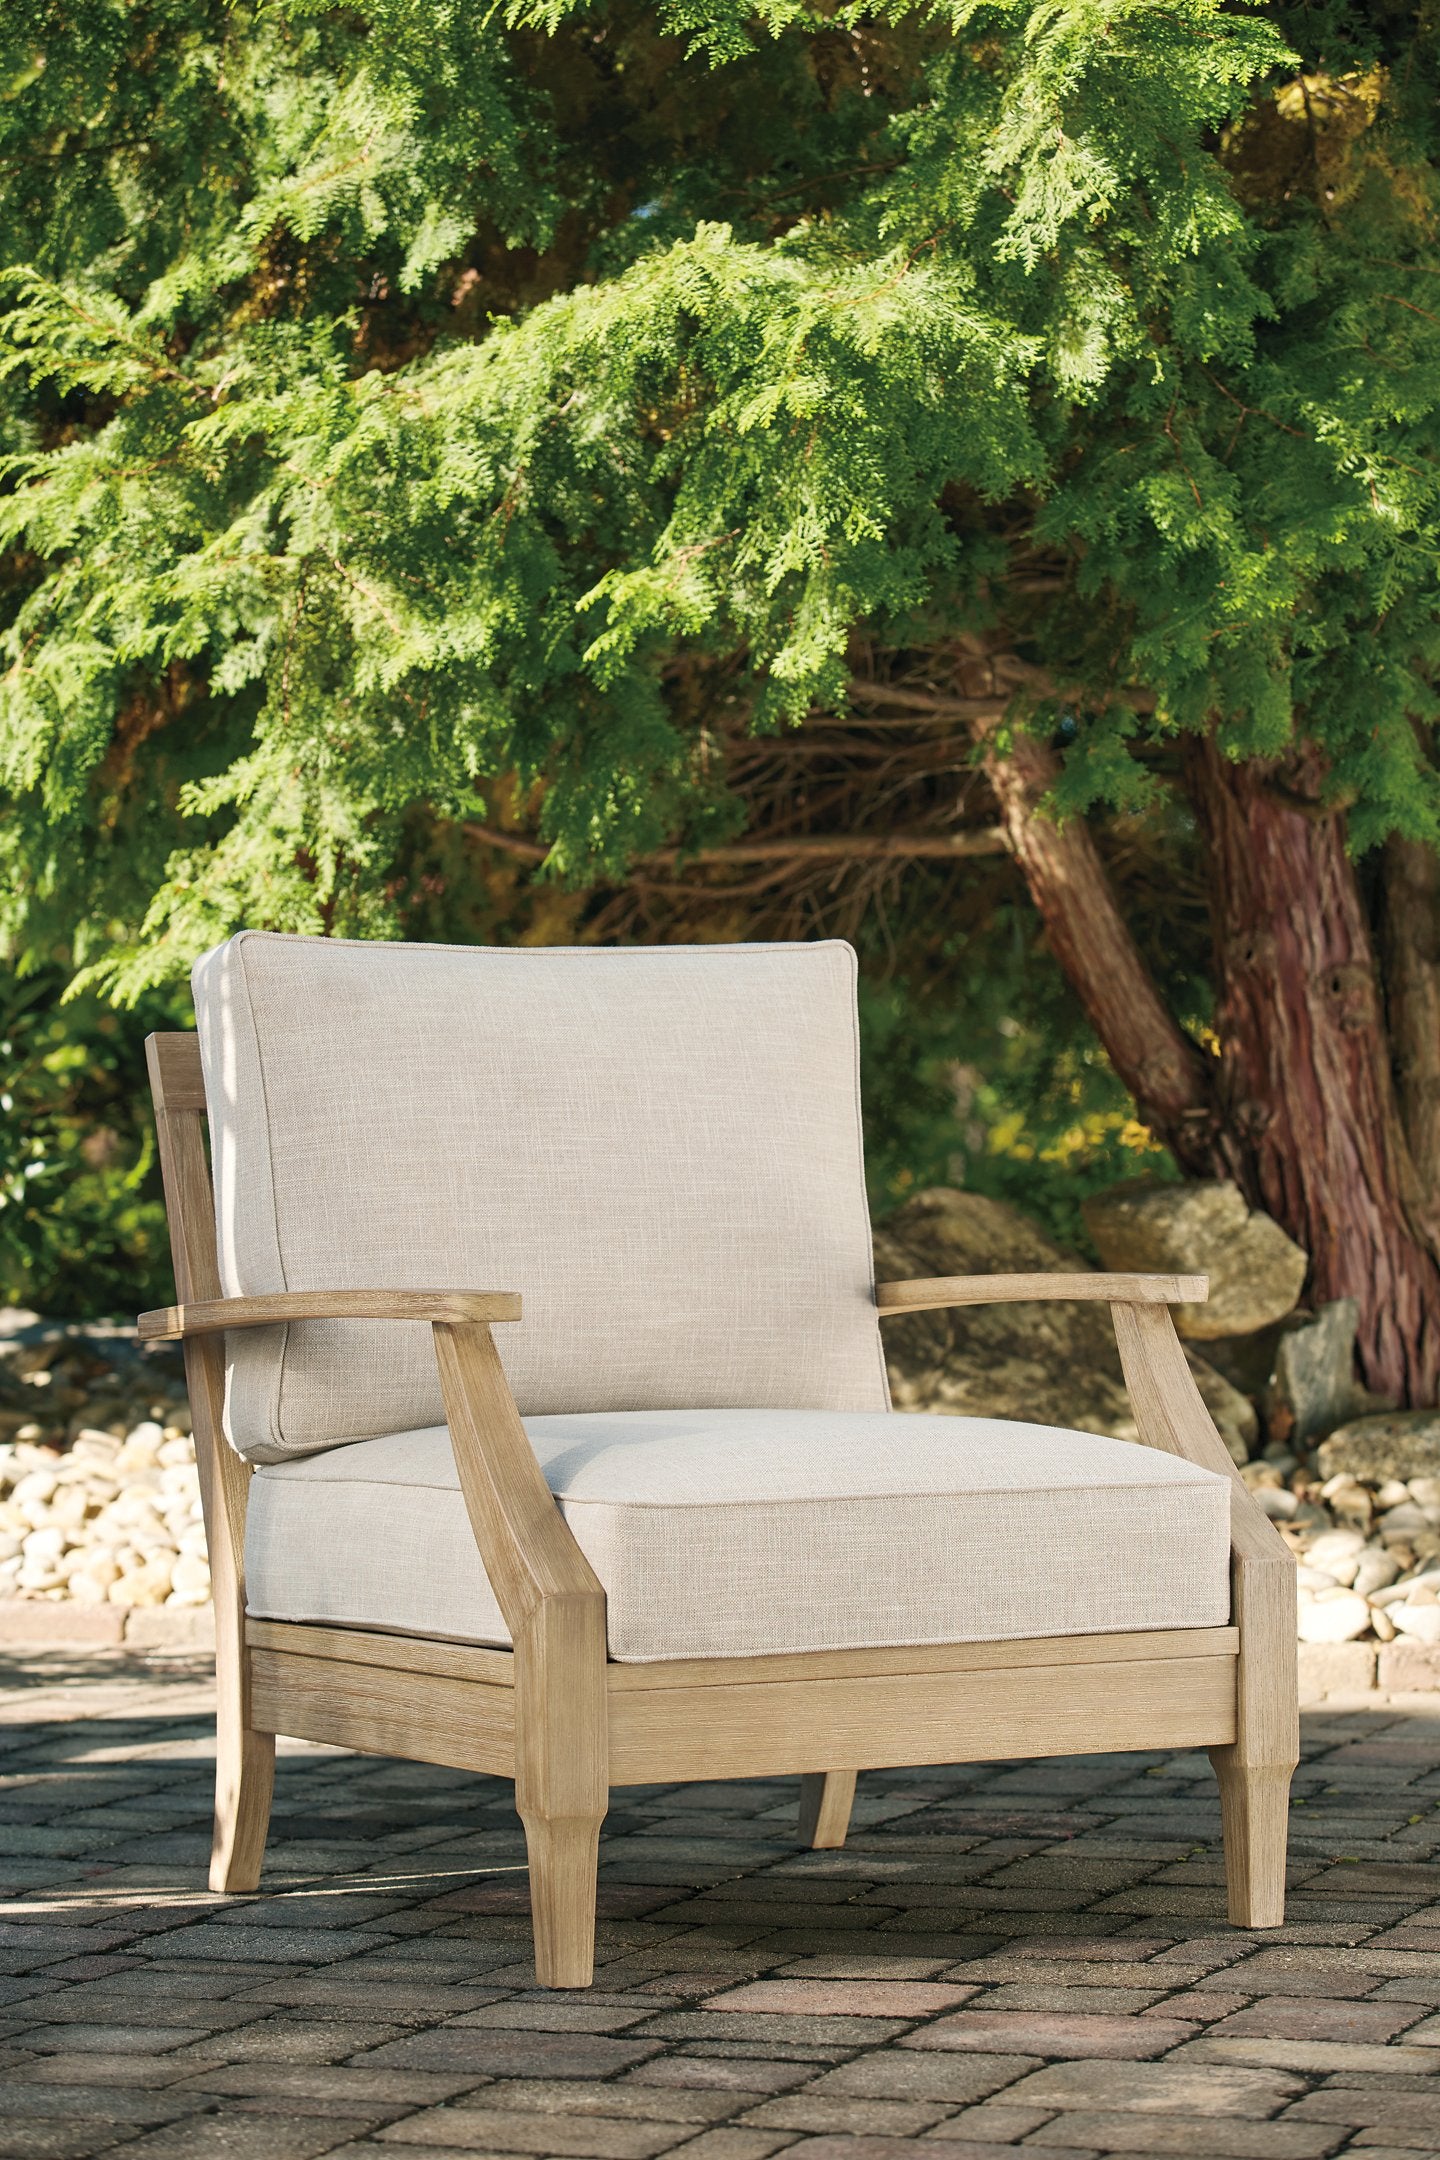 Clare View Lounge Chair with Cushion - Half Price Furniture